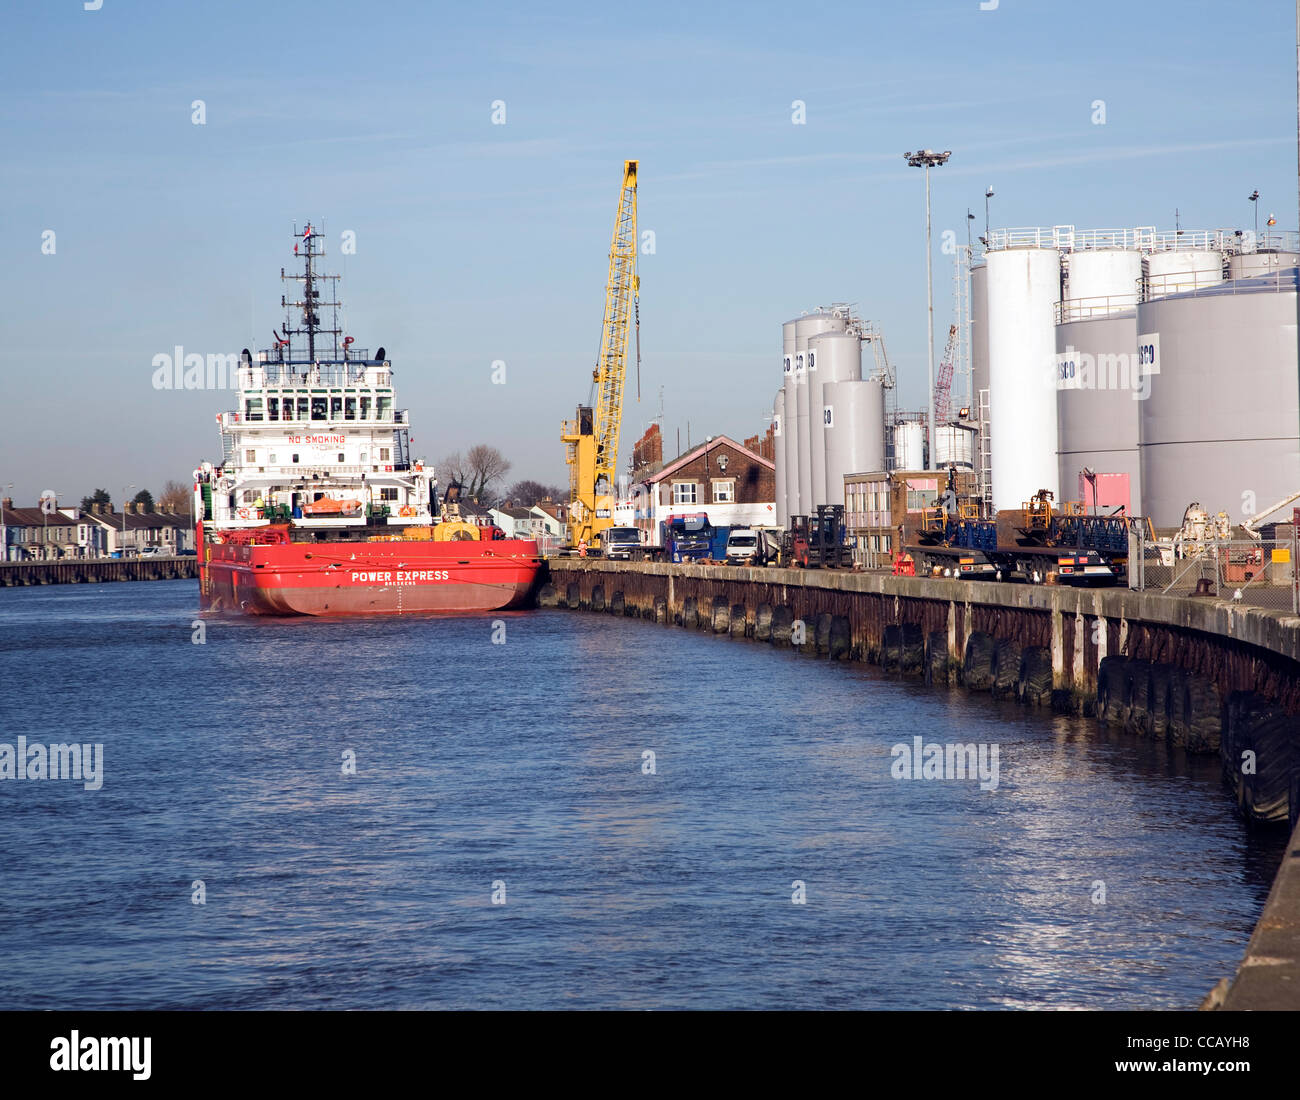 Ship and industry River Yare Great Yarmouth Stock Photo